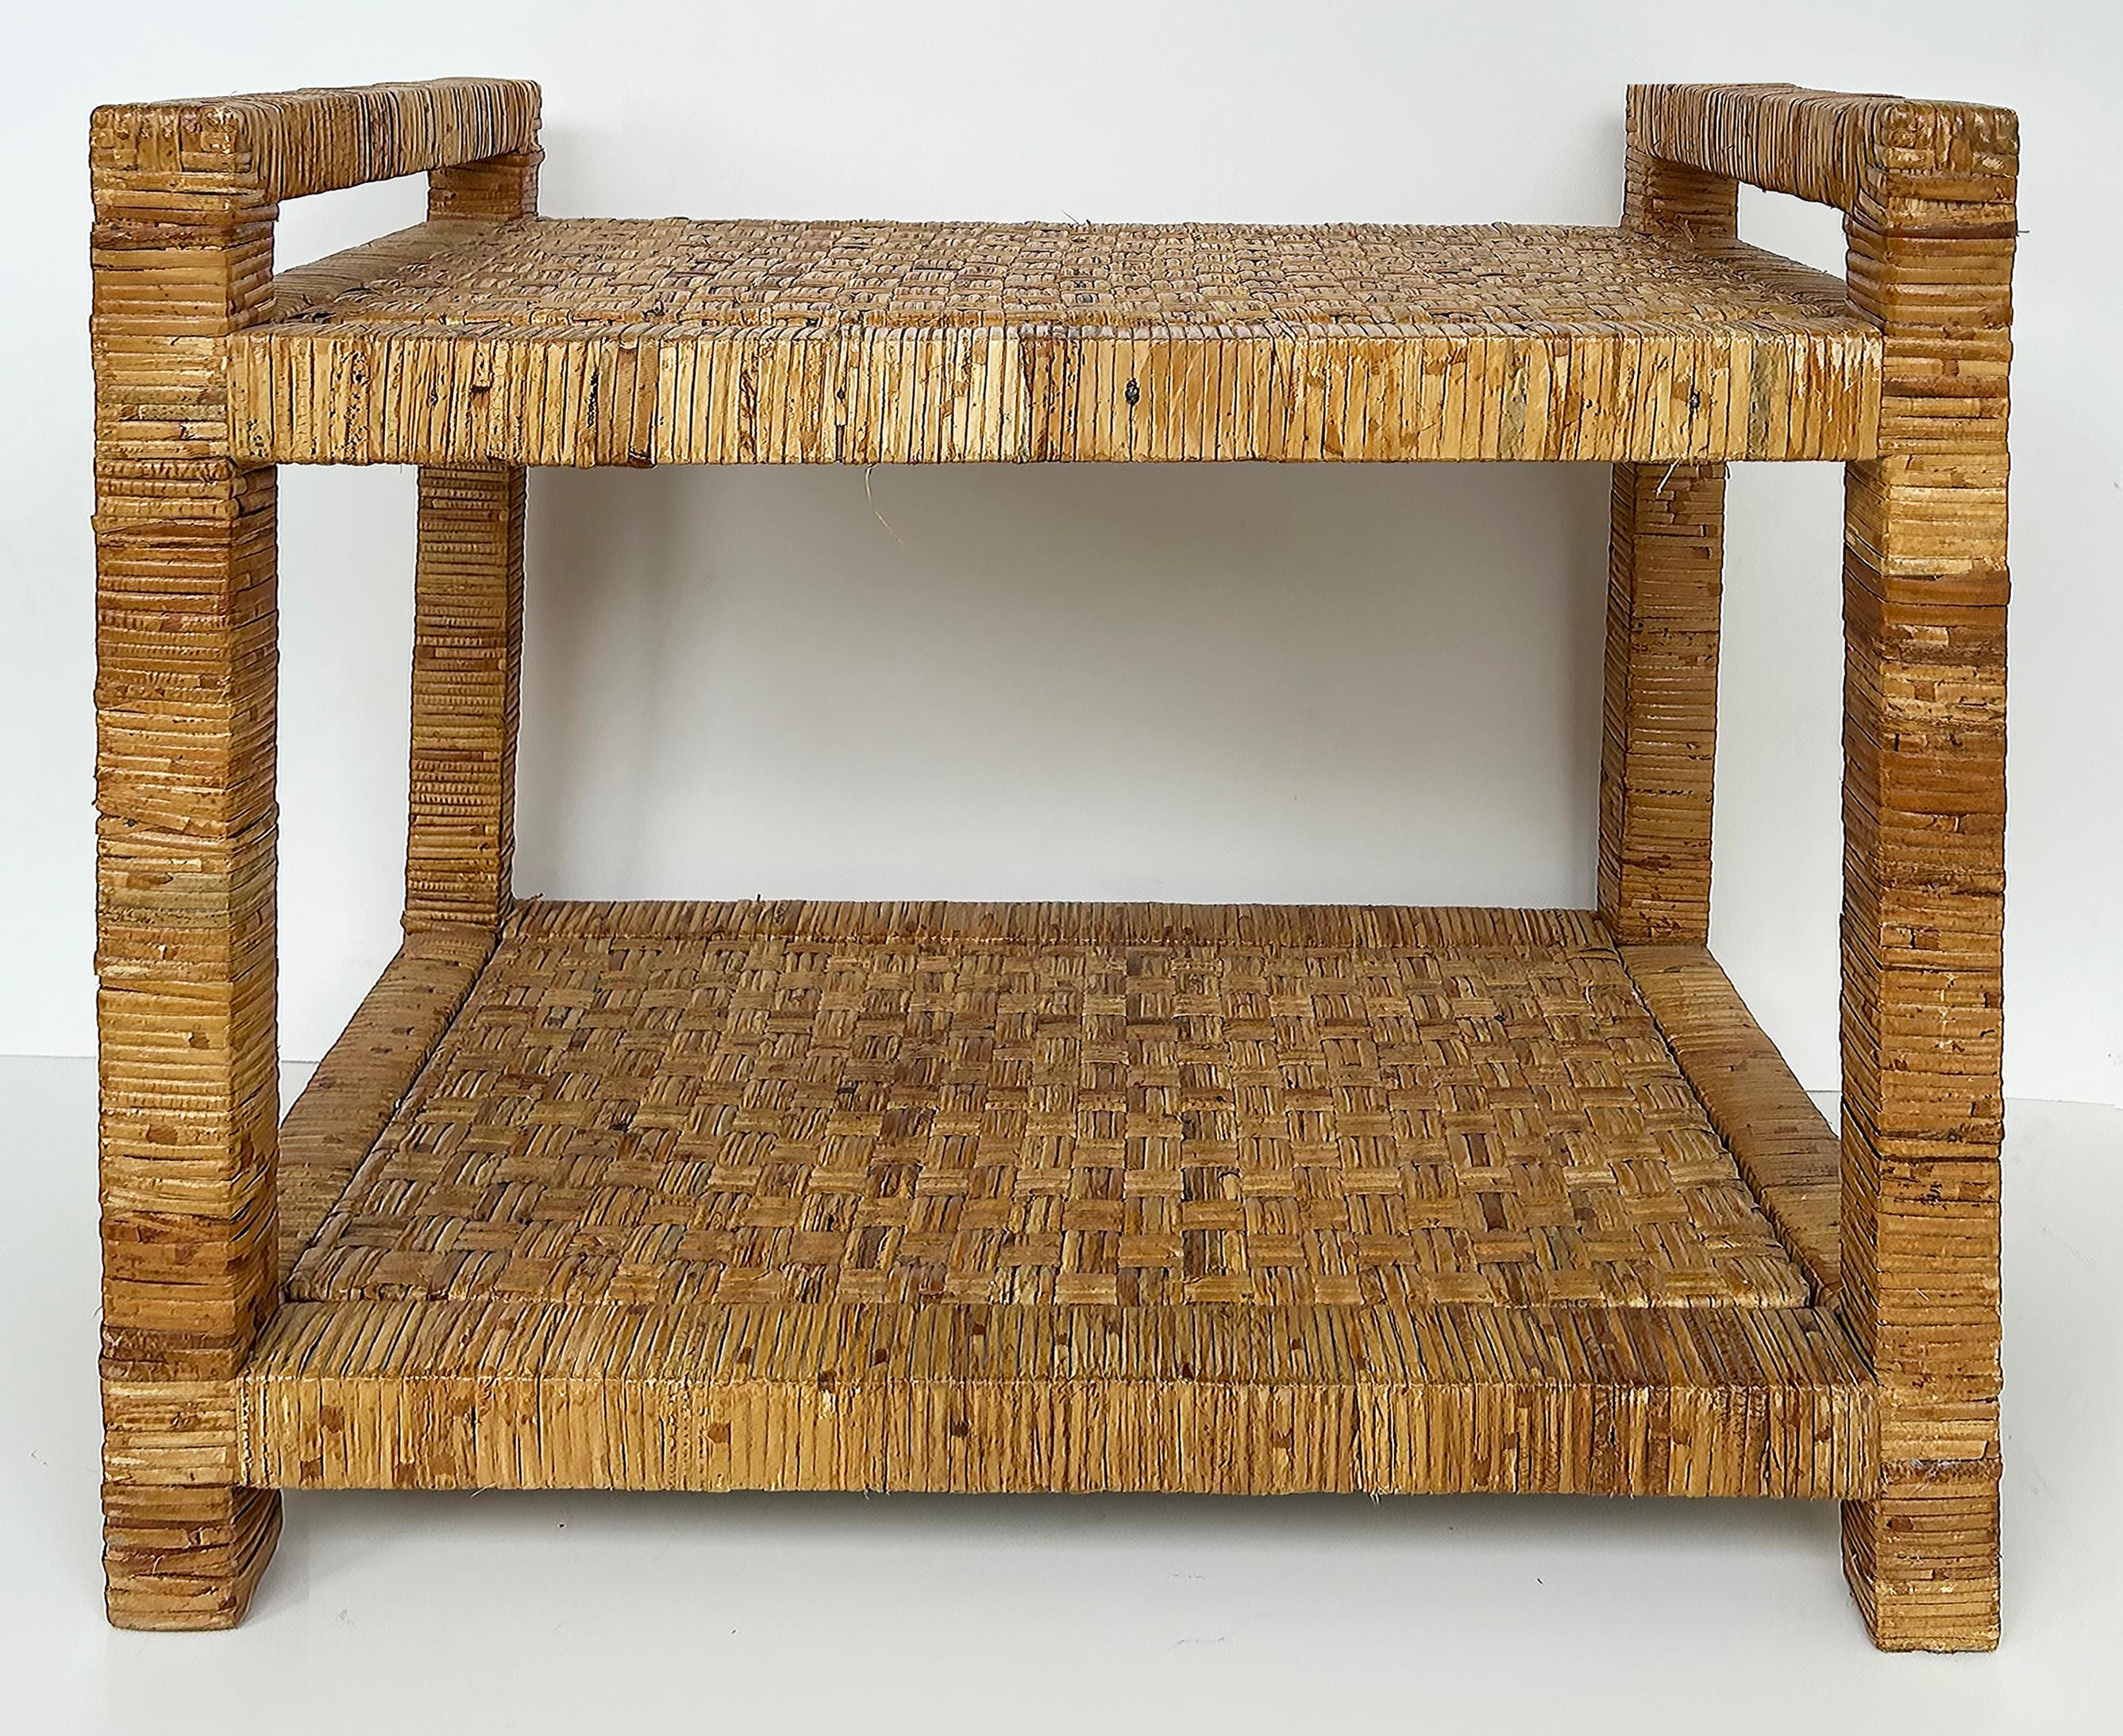 Vintage Coastal Rattan Wrapped Side Table or Service Bar


Offered for sale is a vintage coastal modern side table that is wrapped in split rattan.  The table would make a great service center for a bar. The surfaces are woven rattan and provide